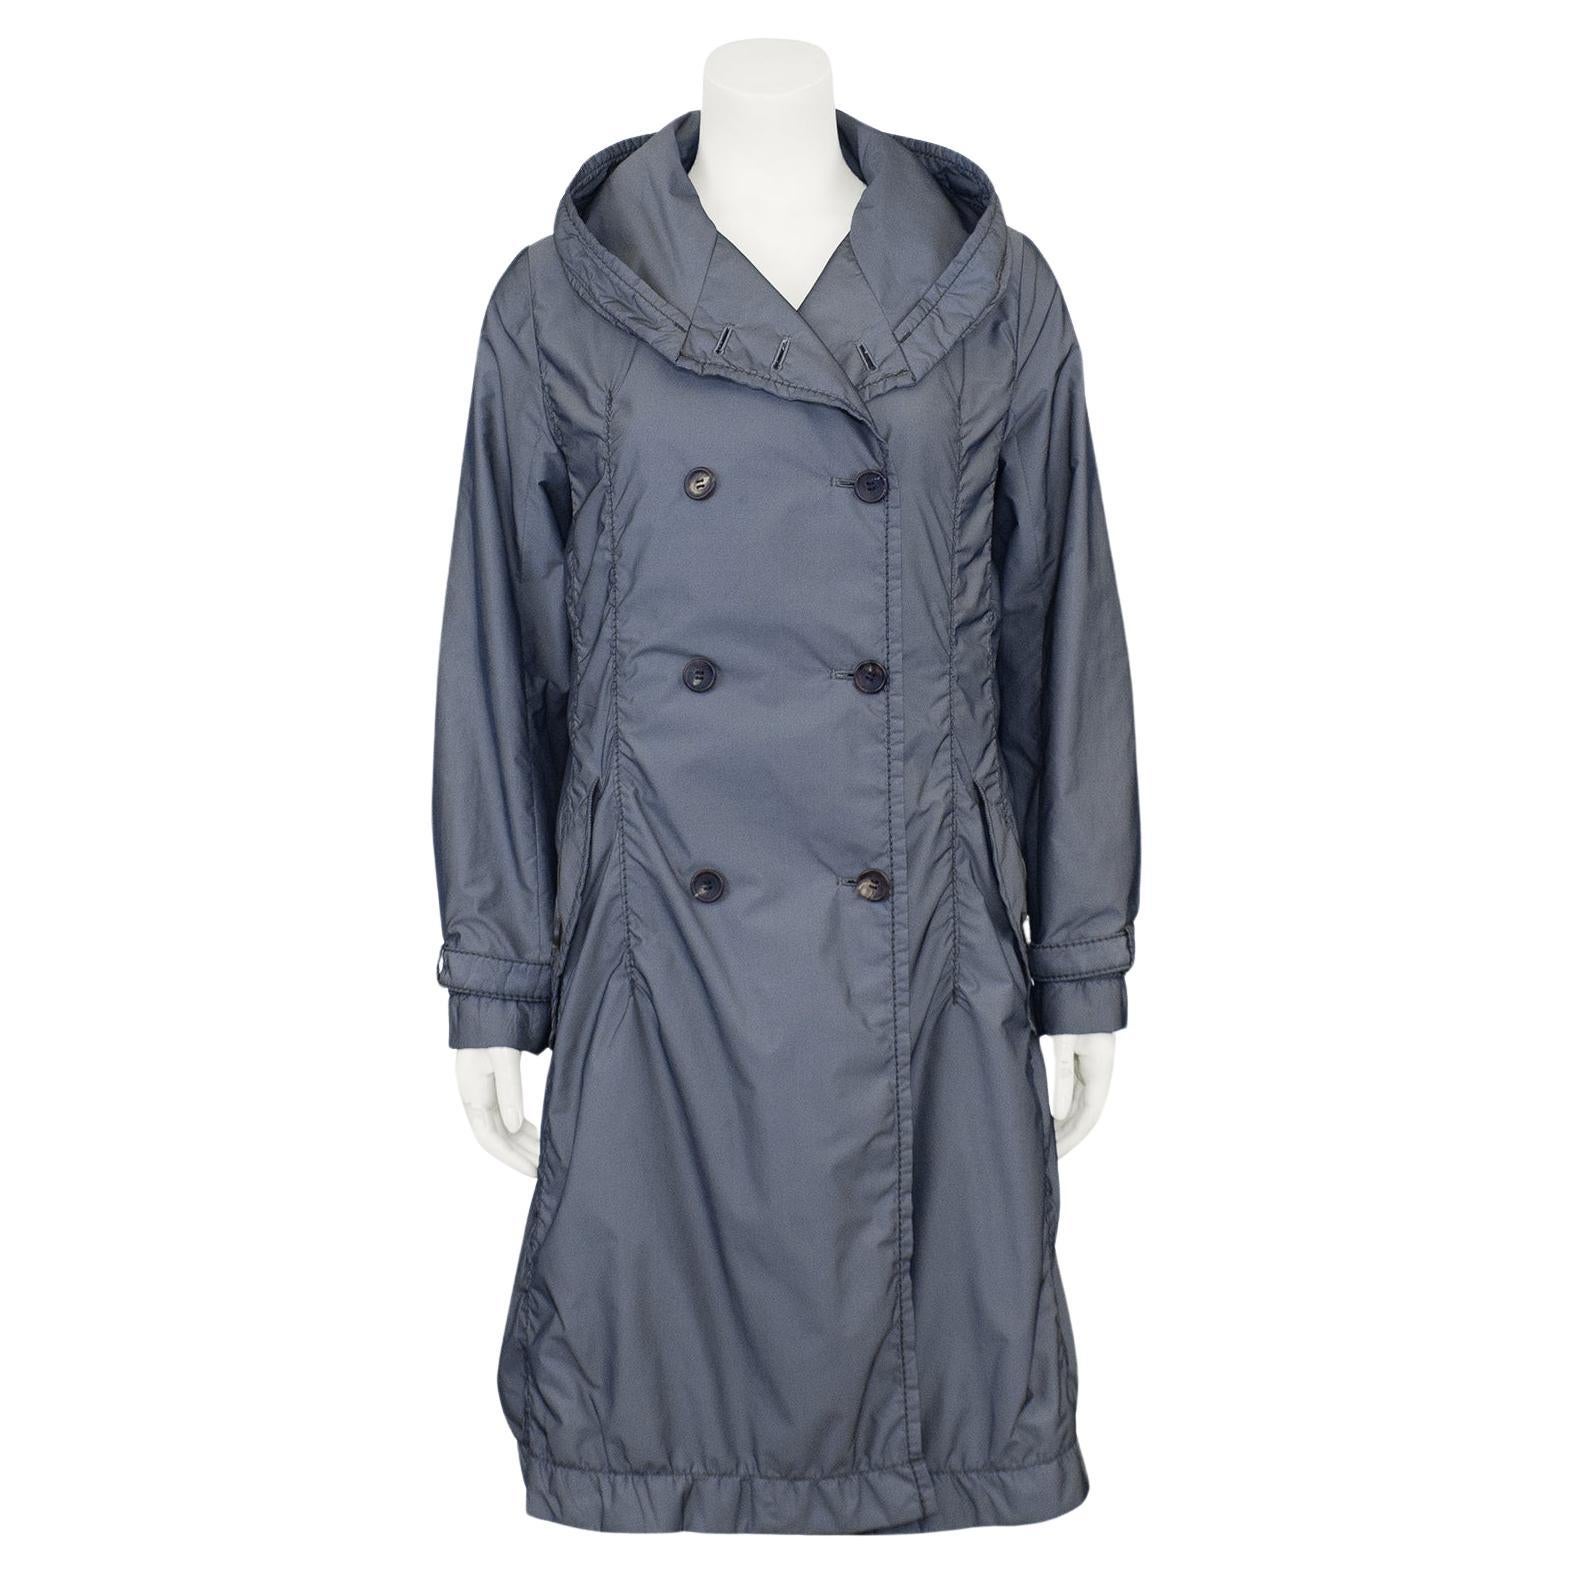 Issey Miyake Grey Wind/parachute style trench des années 1990 en vente